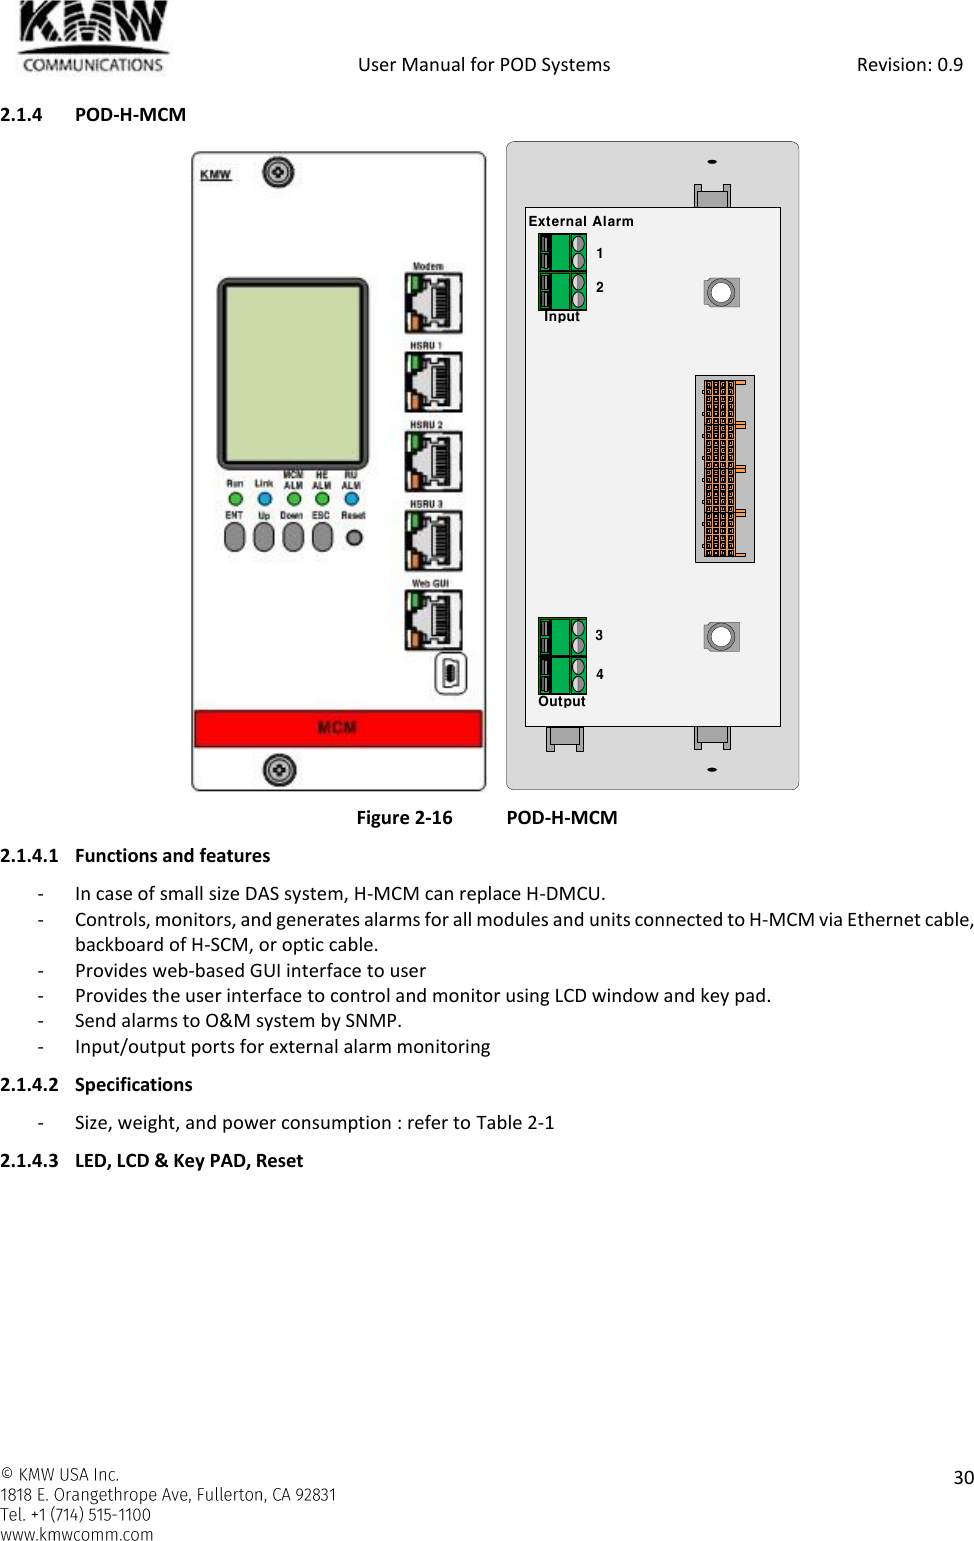            User Manual for POD Systems                                                     Revision: 0.9    30  2.1.4 POD-H-MCM                 Figure 2-16 POD-H-MCM 2.1.4.1 Functions and features - In case of small size DAS system, H-MCM can replace H-DMCU. - Controls, monitors, and generates alarms for all modules and units connected to H-MCM via Ethernet cable, backboard of H-SCM, or optic cable. - Provides web-based GUI interface to user - Provides the user interface to control and monitor using LCD window and key pad. - Send alarms to O&amp;M system by SNMP. - Input/output ports for external alarm monitoring 2.1.4.2 Specifications - Size, weight, and power consumption : refer to Table 2-1 2.1.4.3 LED, LCD &amp; Key PAD, Reset External AlarmInputOutput1234